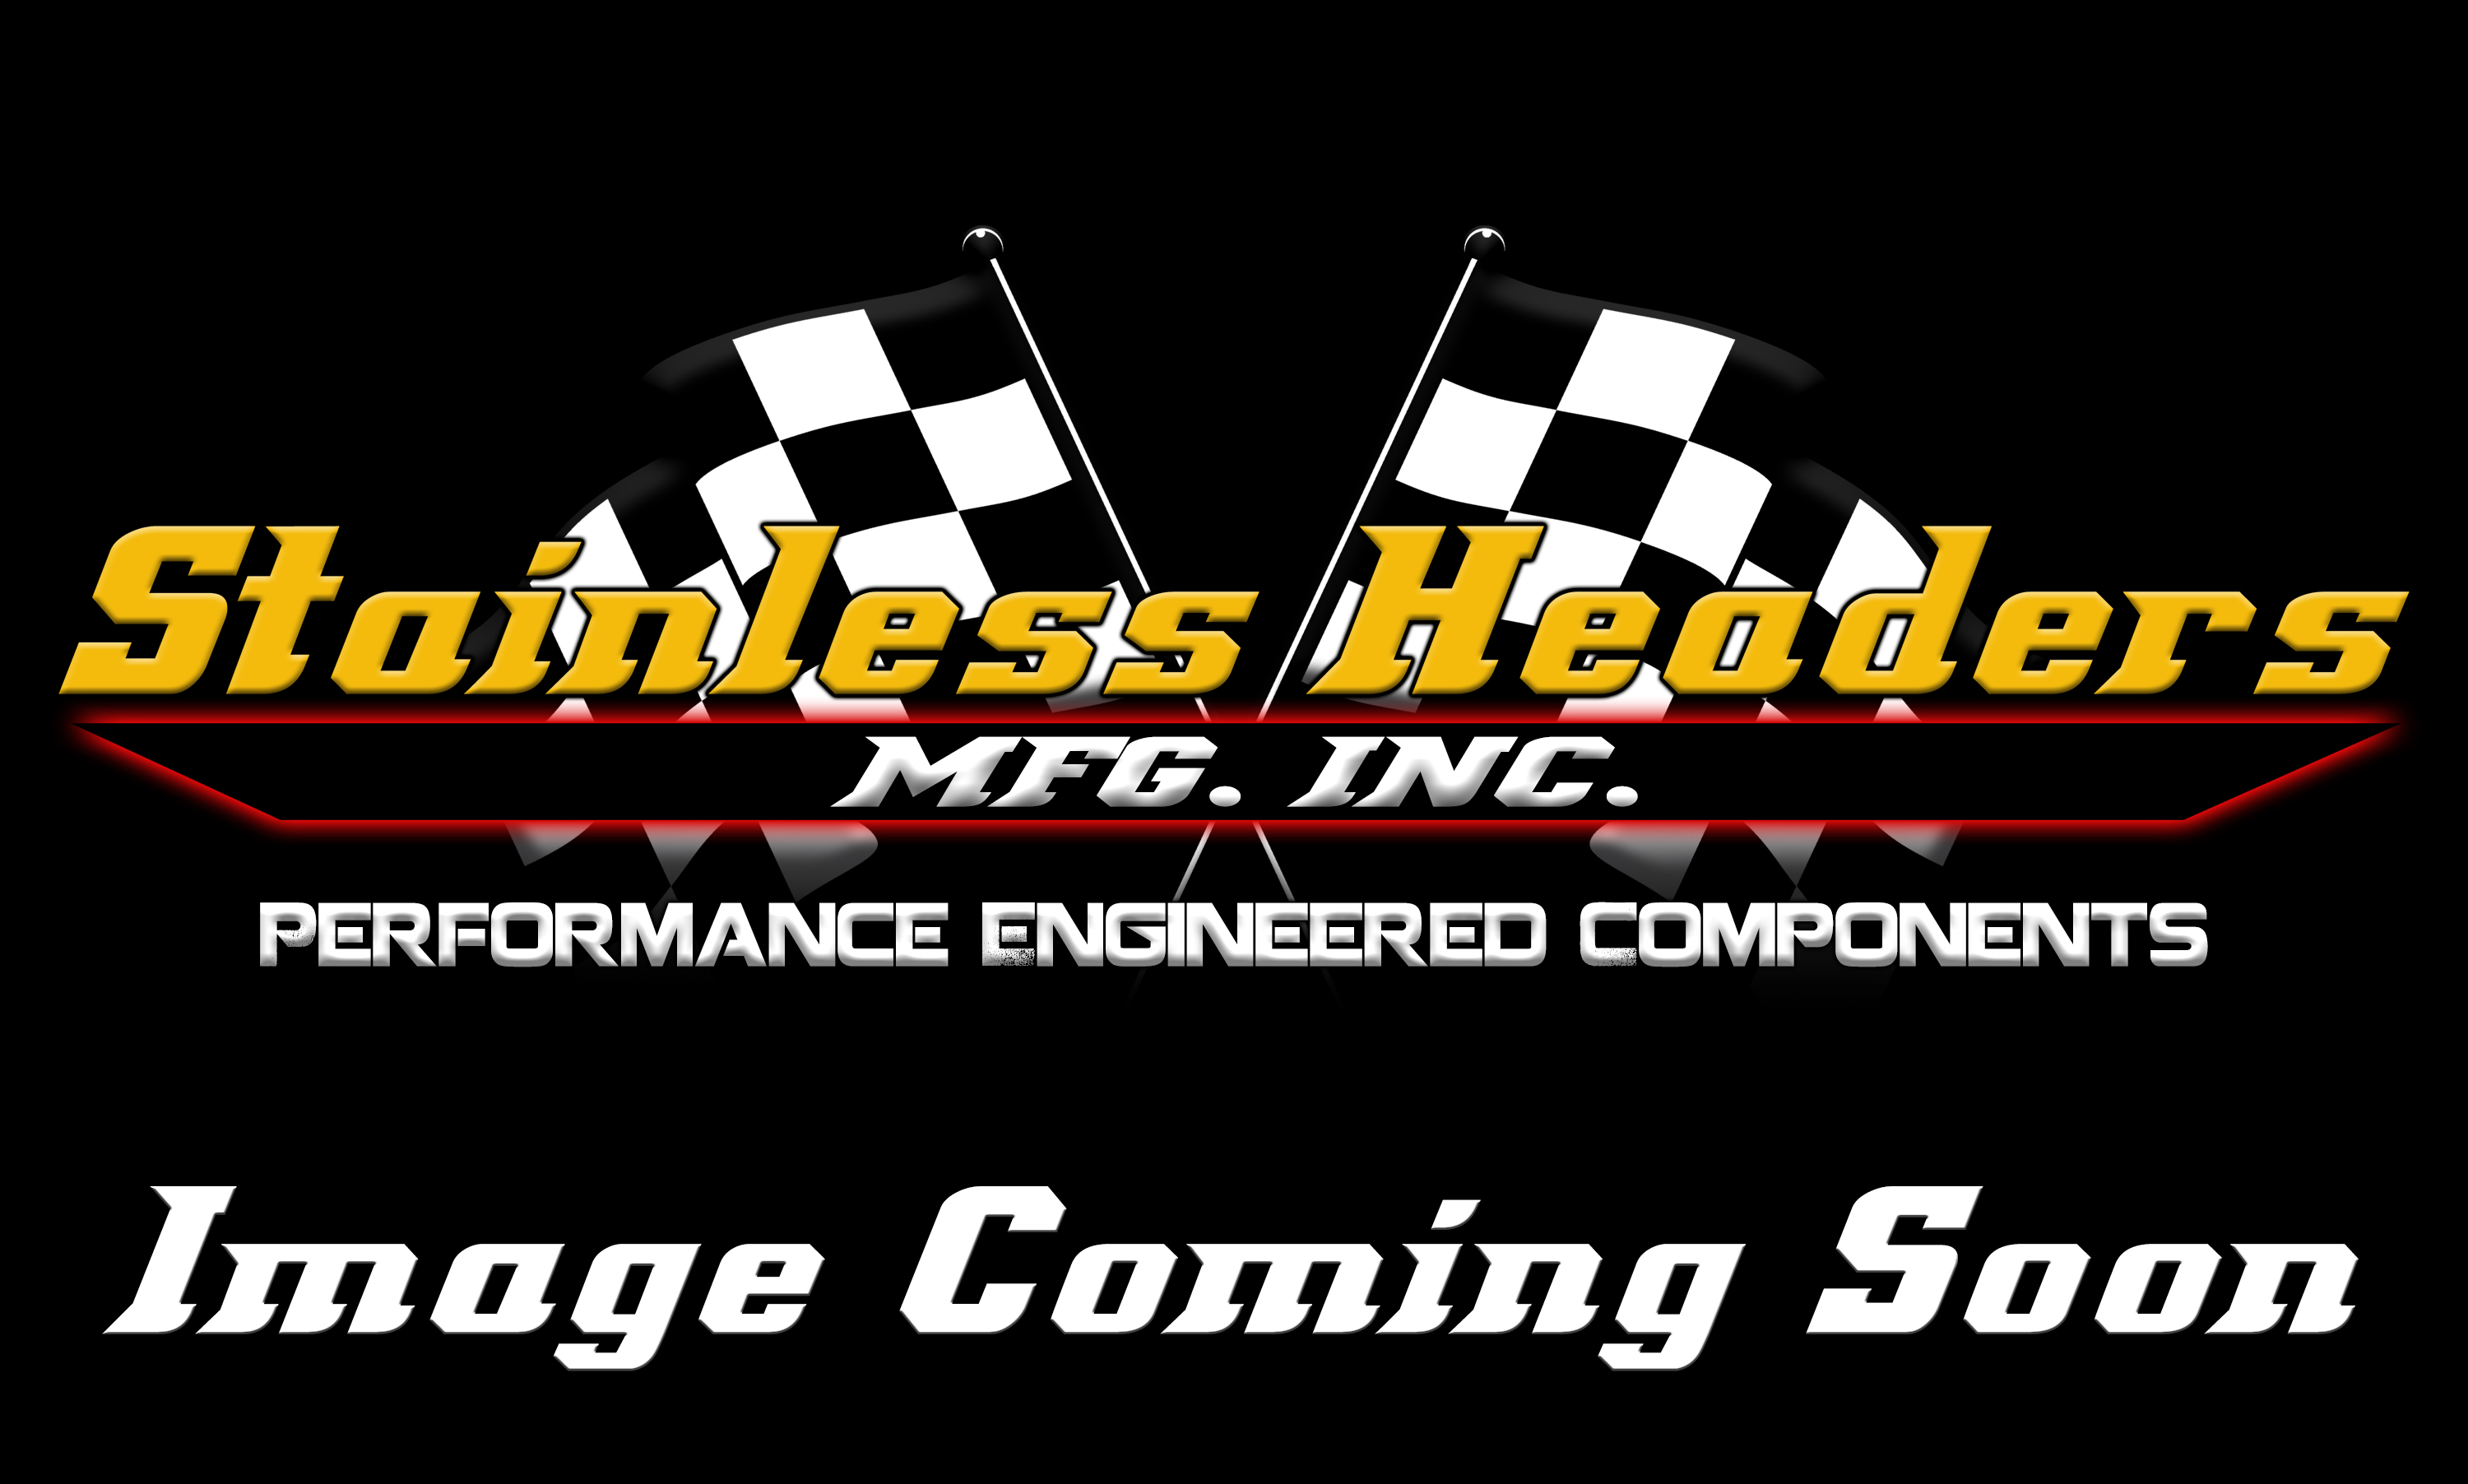 CompTurbo Technology Turbochargers - Comp Turbo Triple Ball Bearing Oil-Less 3.0 Turbochargers - CompTurbo Technologies - CTR4202R-7485 Mid Frame Oil-Less 3.0 Turbocharger (1300 HP)